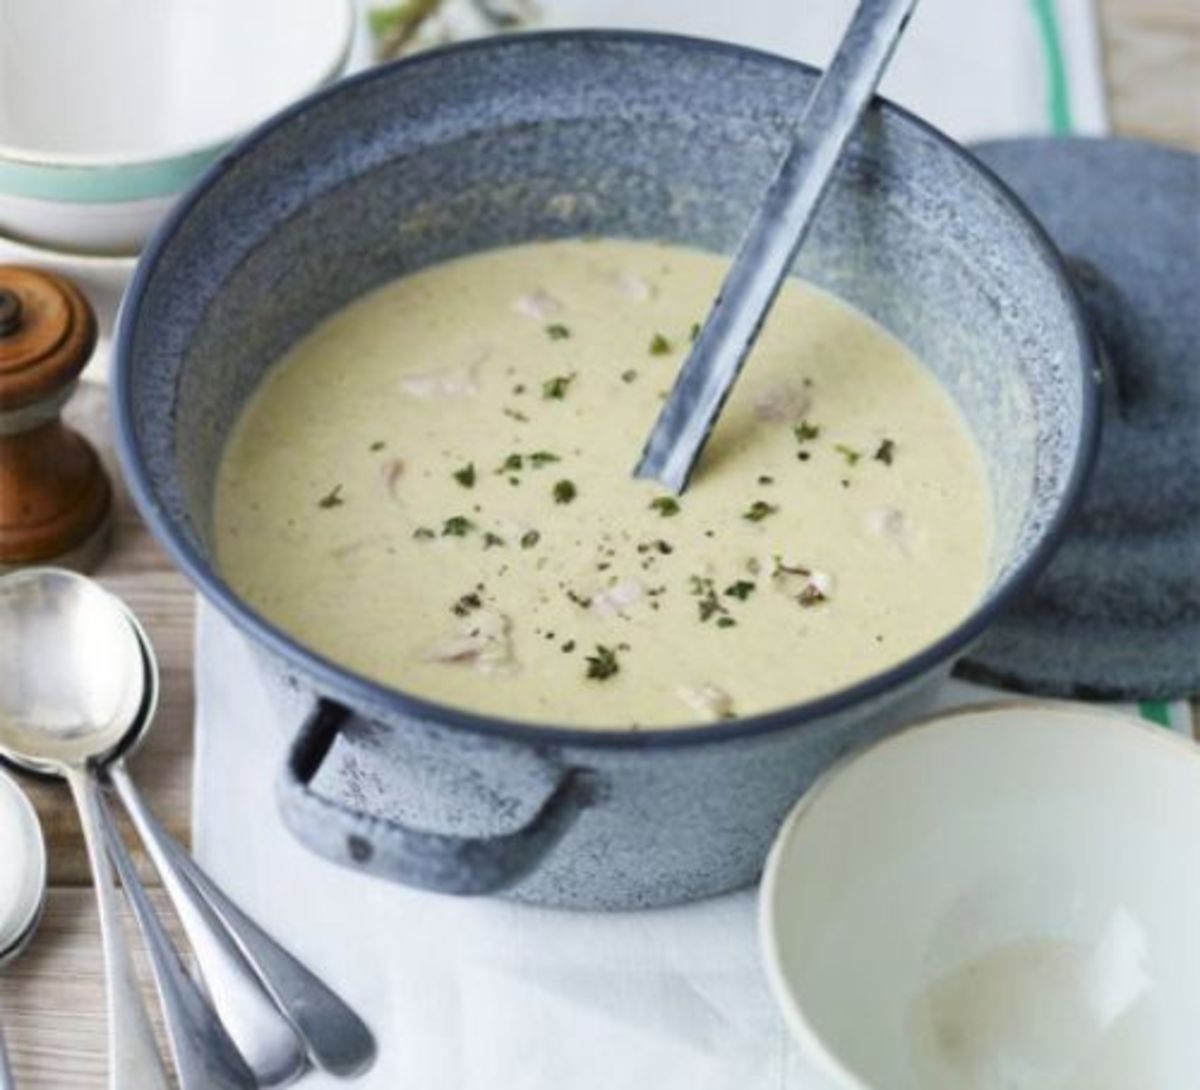 Pressure canned milk is suitable for almost any cooked application, such as this beautifully presented cream soup.